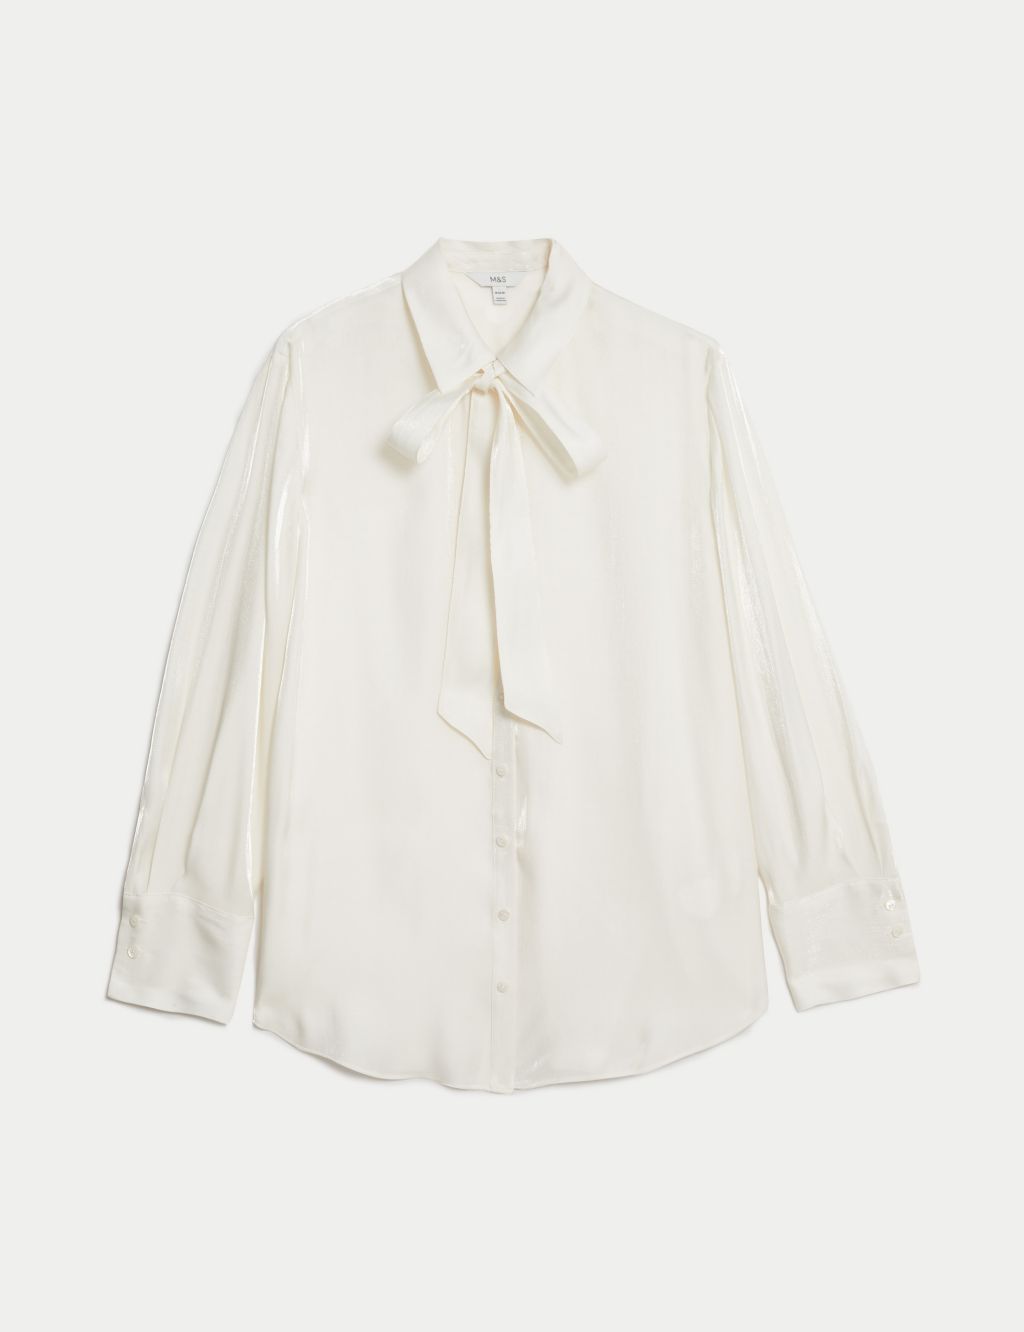 Tie Neck Collared Shirt | M&S Collection | M&S